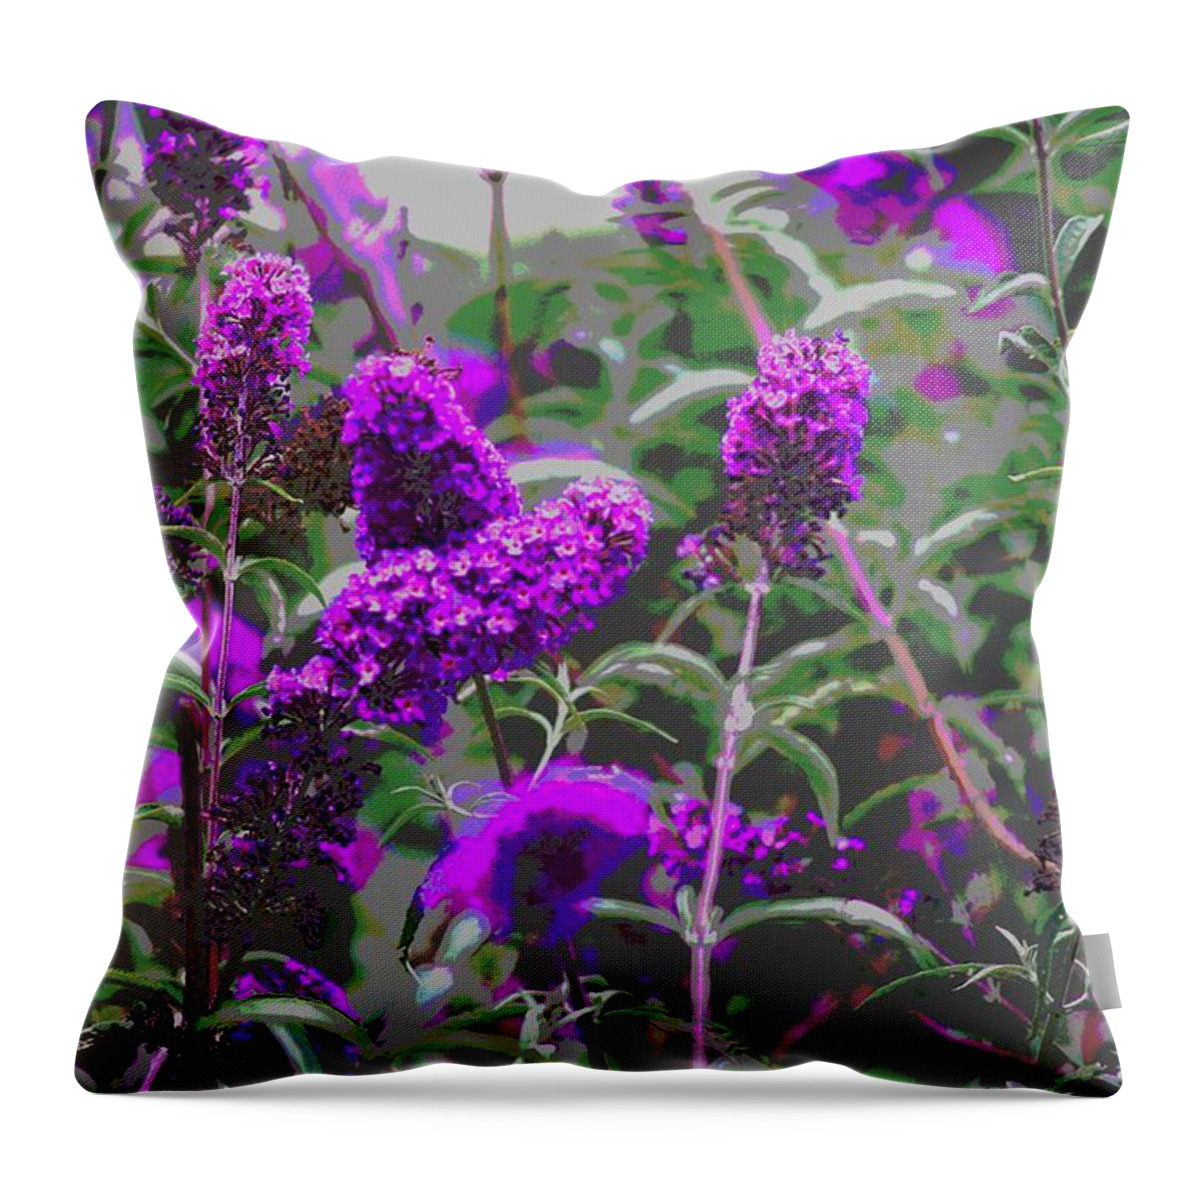 Purple Throw Pillow featuring the photograph Purple Flowers by Suzanne Powers